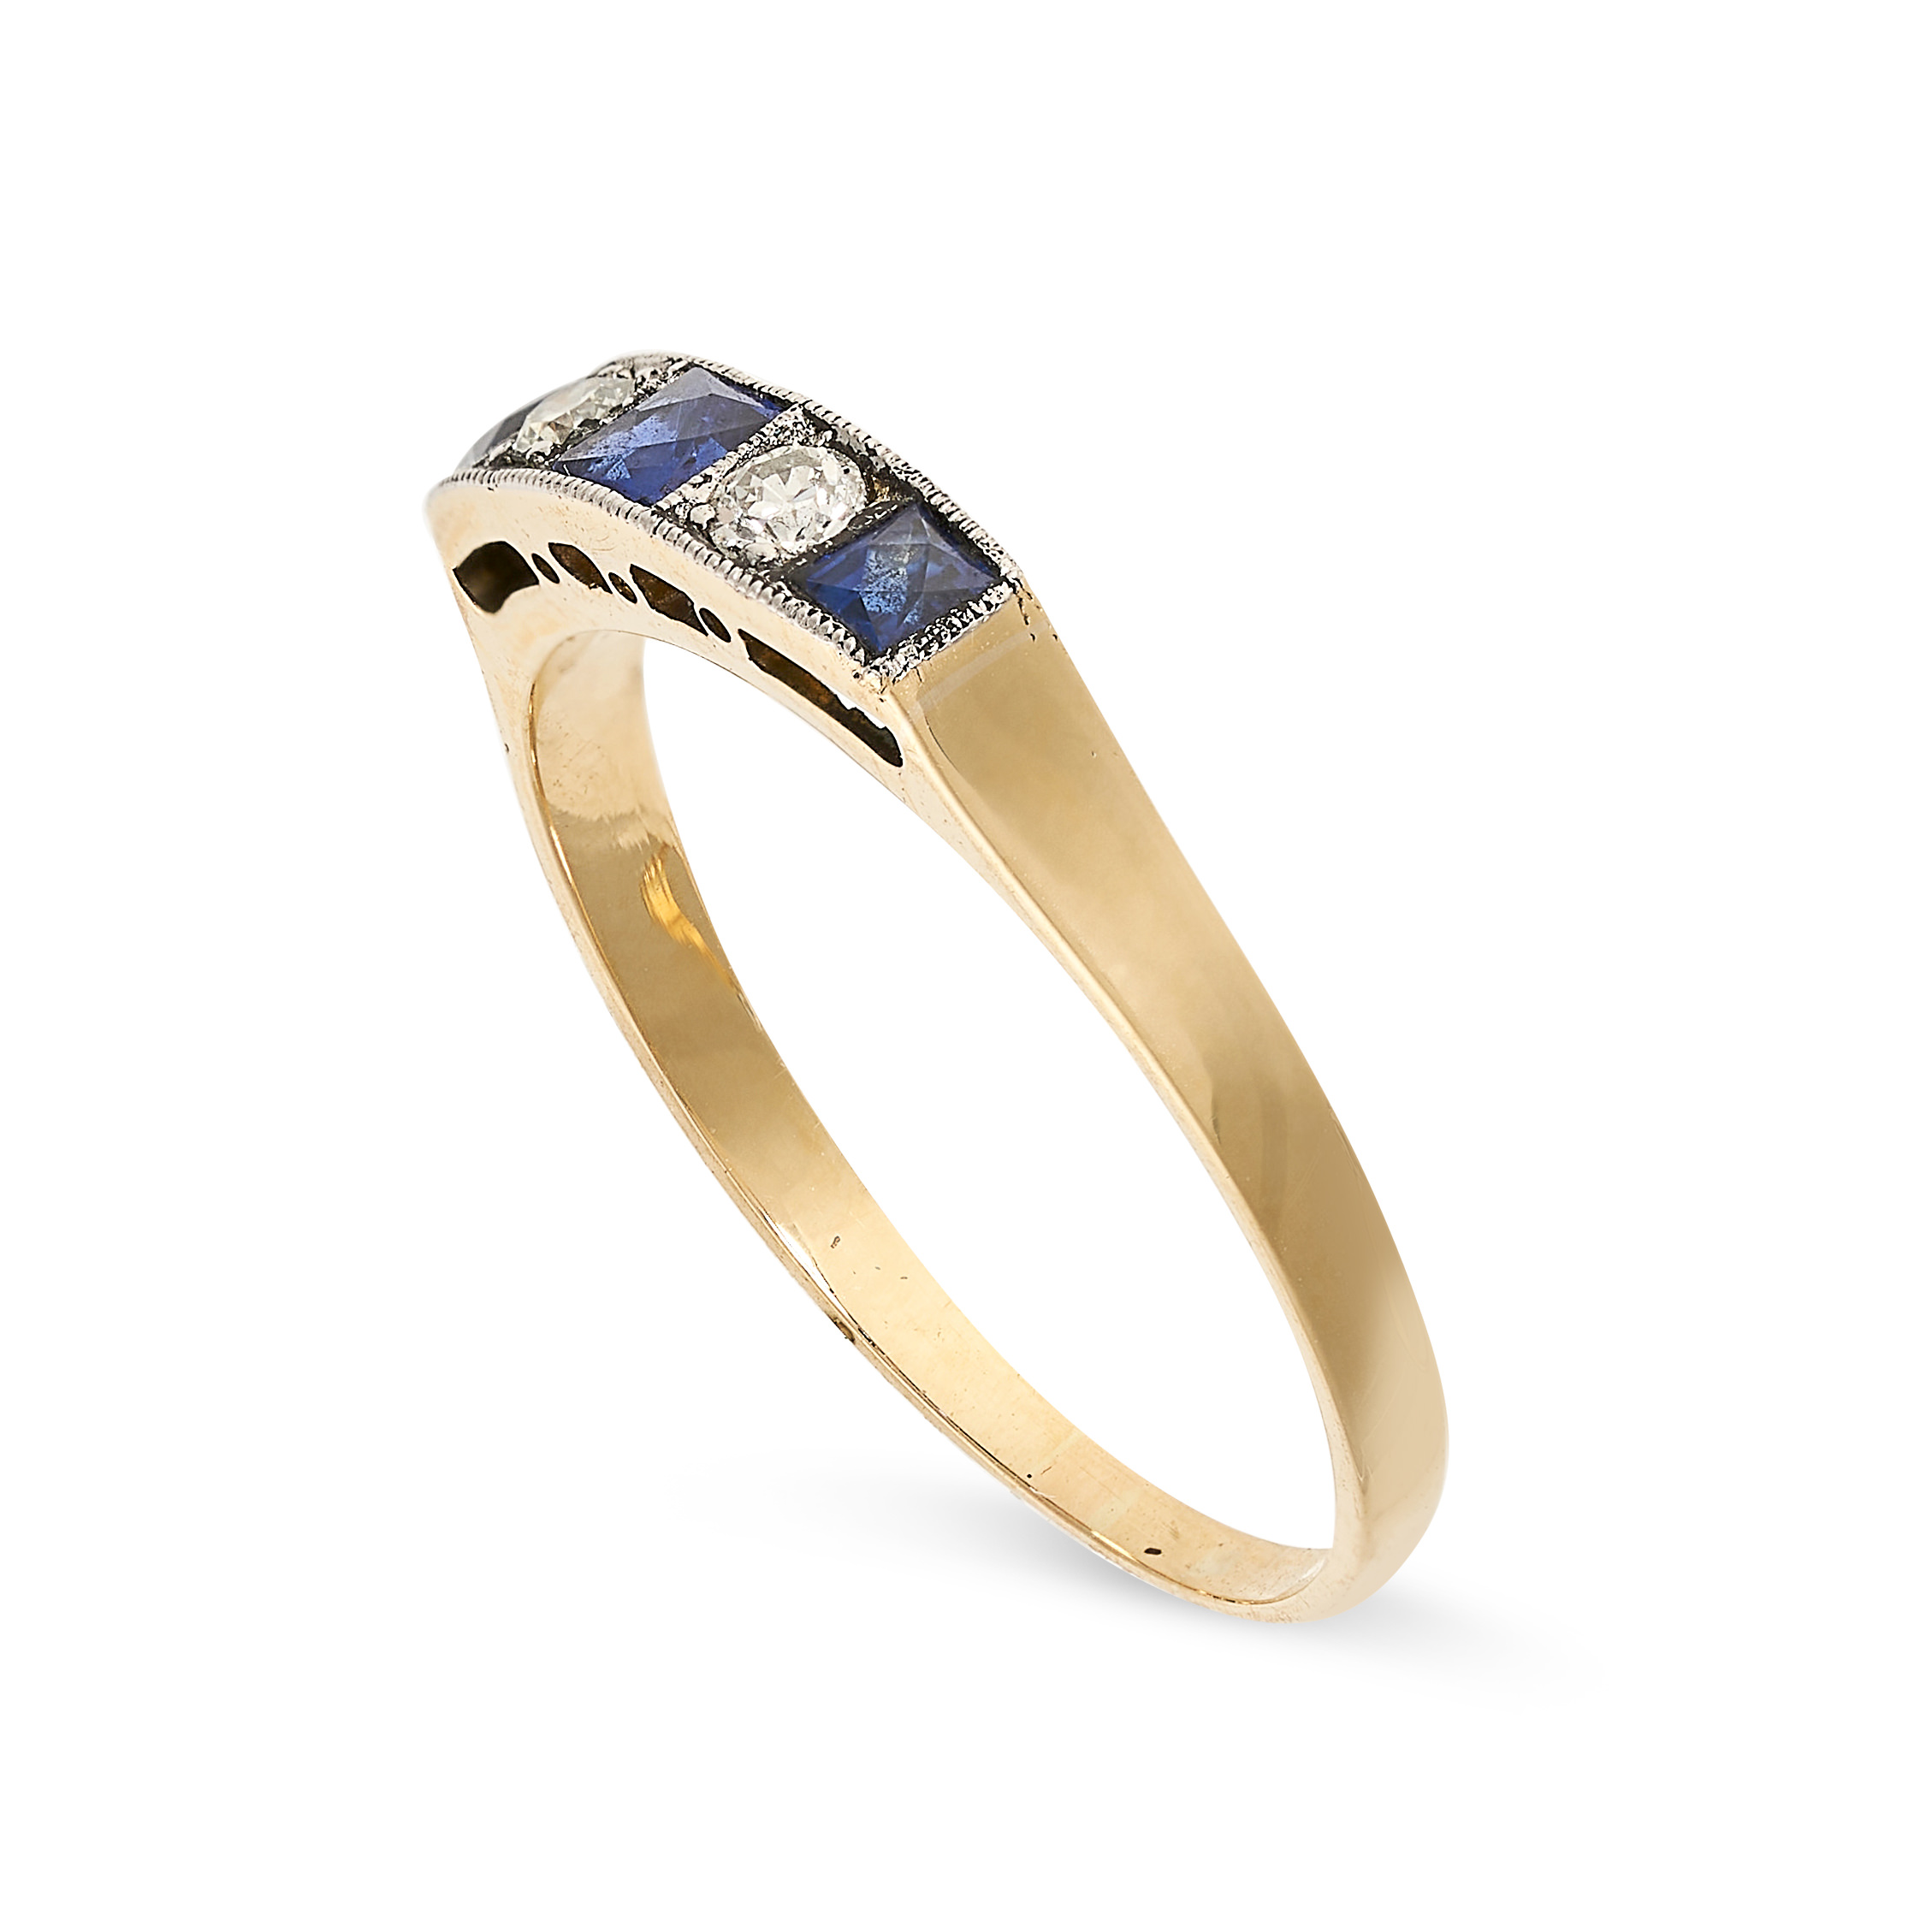 AN ART DECO SAPPHIRE AND DIAMOND DRESS RING in 18ct yellow gold and platinum, set with a trio of - Image 2 of 2